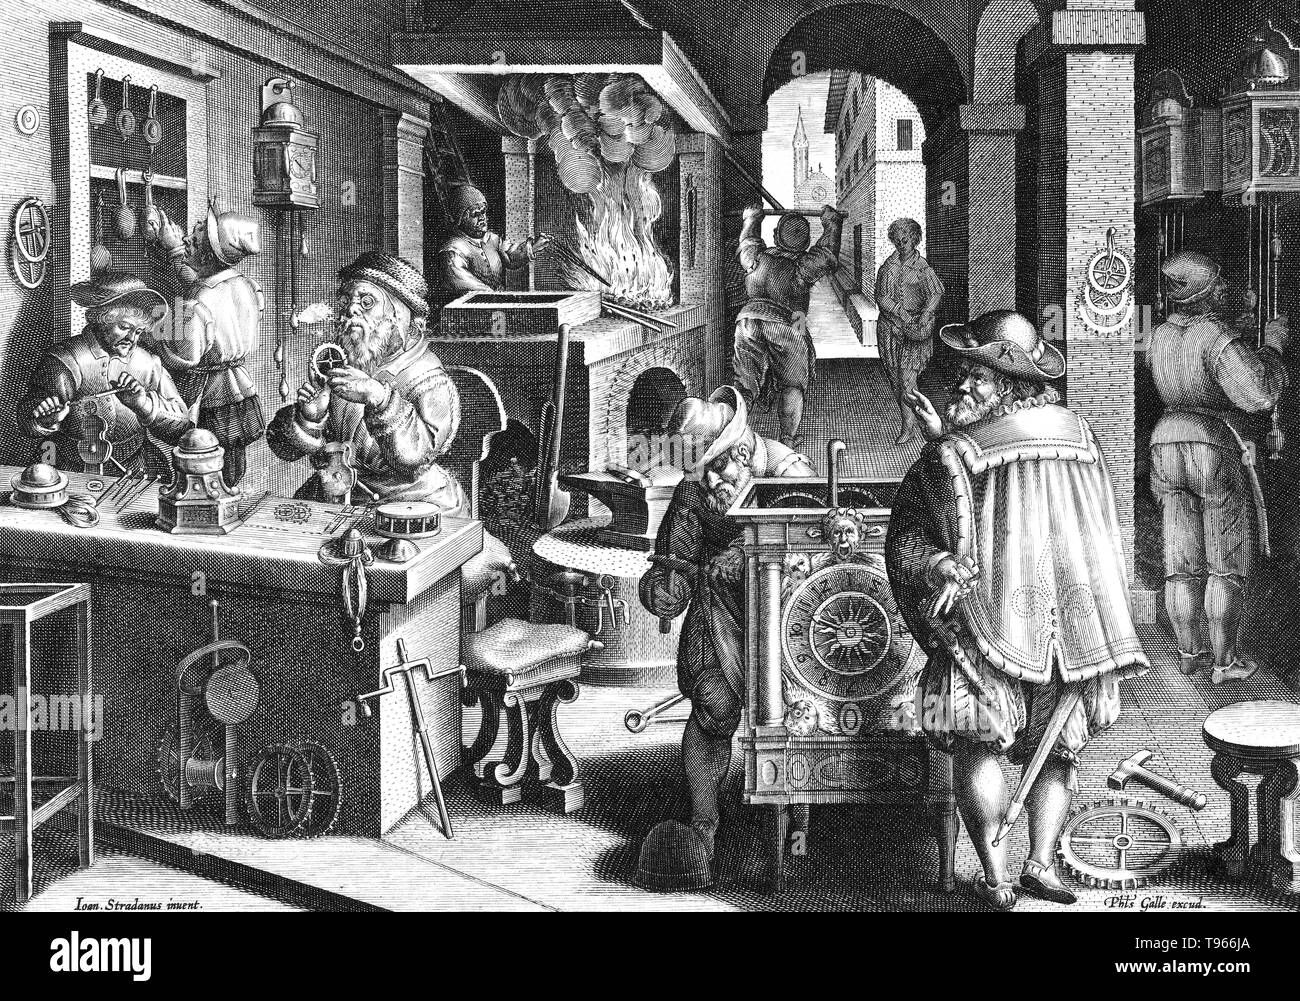 PLATE 5. The Invention of the Clockwork. Fifth plate from a print series entitled Nova Reperta (New Inventions of Modern Times) consisting of a title page and 19 plates, engraved by Jan Collaert I, after Jan van der Straet, called Stradanus, and published by Philips Galle. Illustration of a clockmaker's workshop. In the middle ground on the left a man heats metal over the fire, and on the right a man examines the weight-driven clocks on the wall. Stock Photo